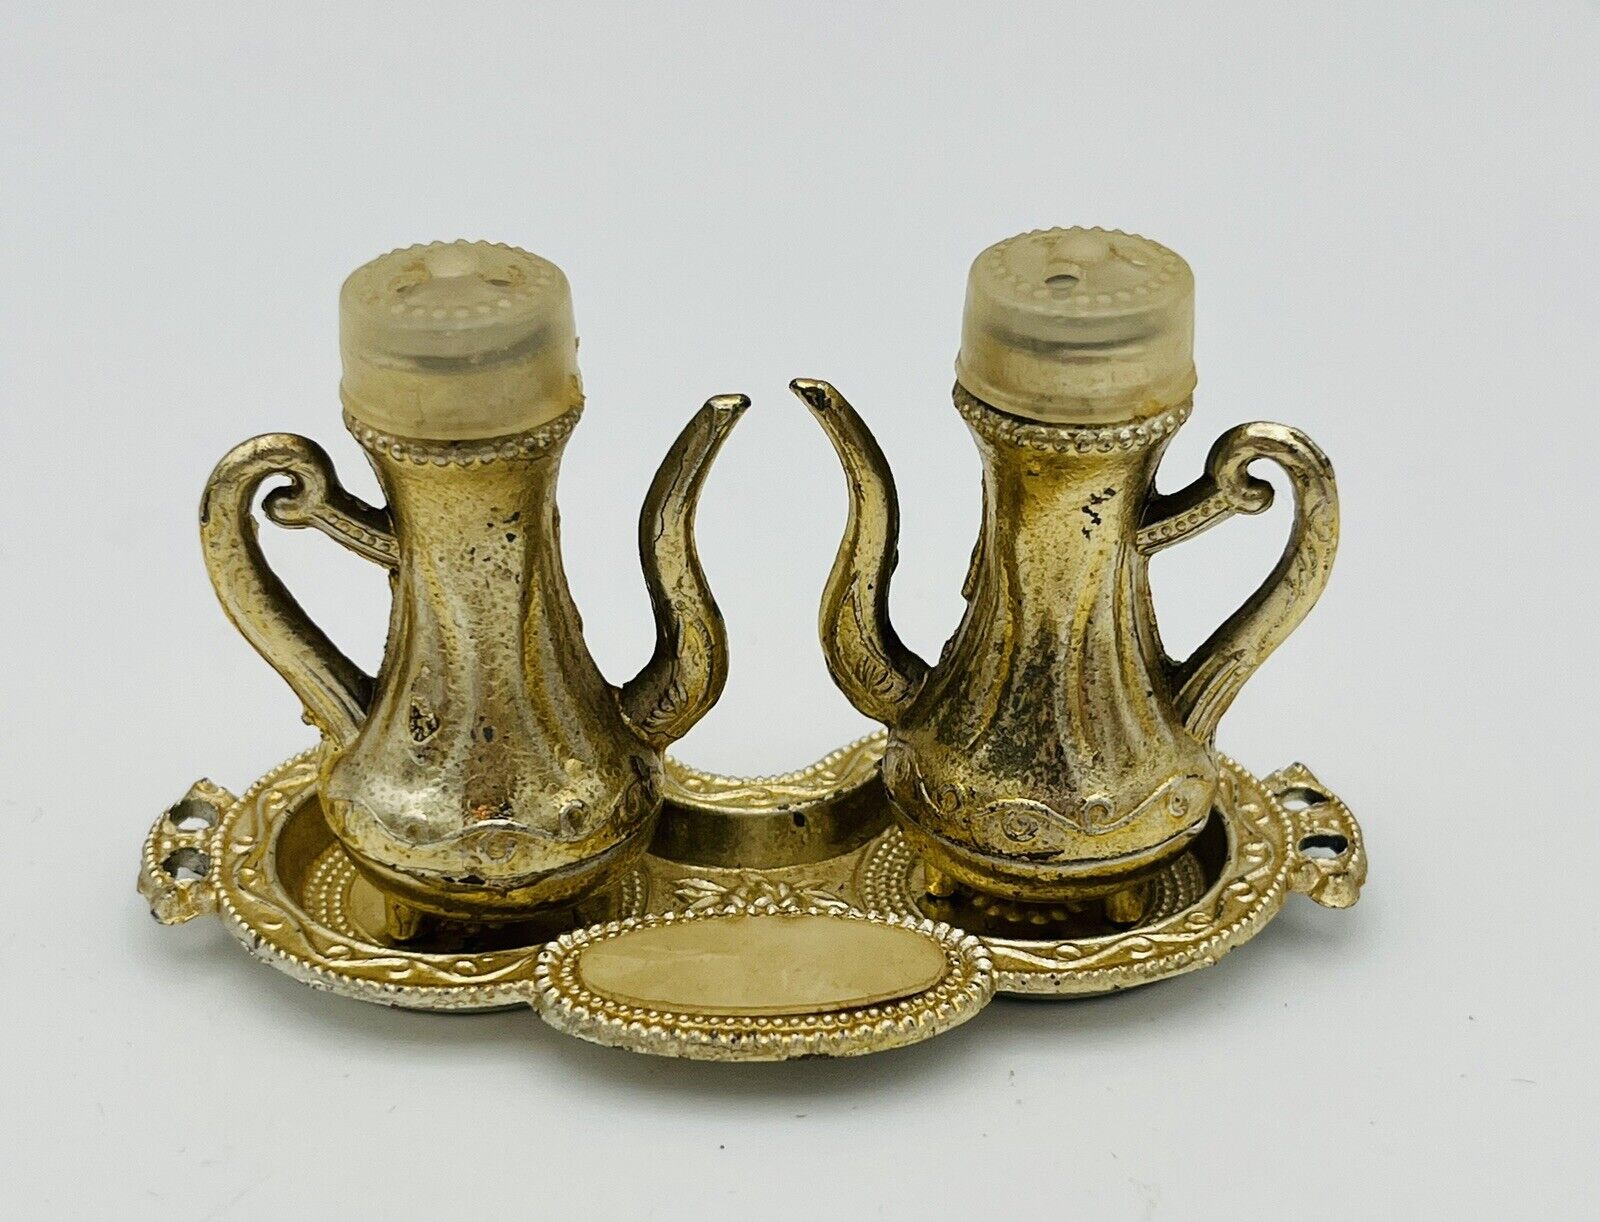 Vintage ornate metal  tea pots salt and pepper shakers with tray Japan